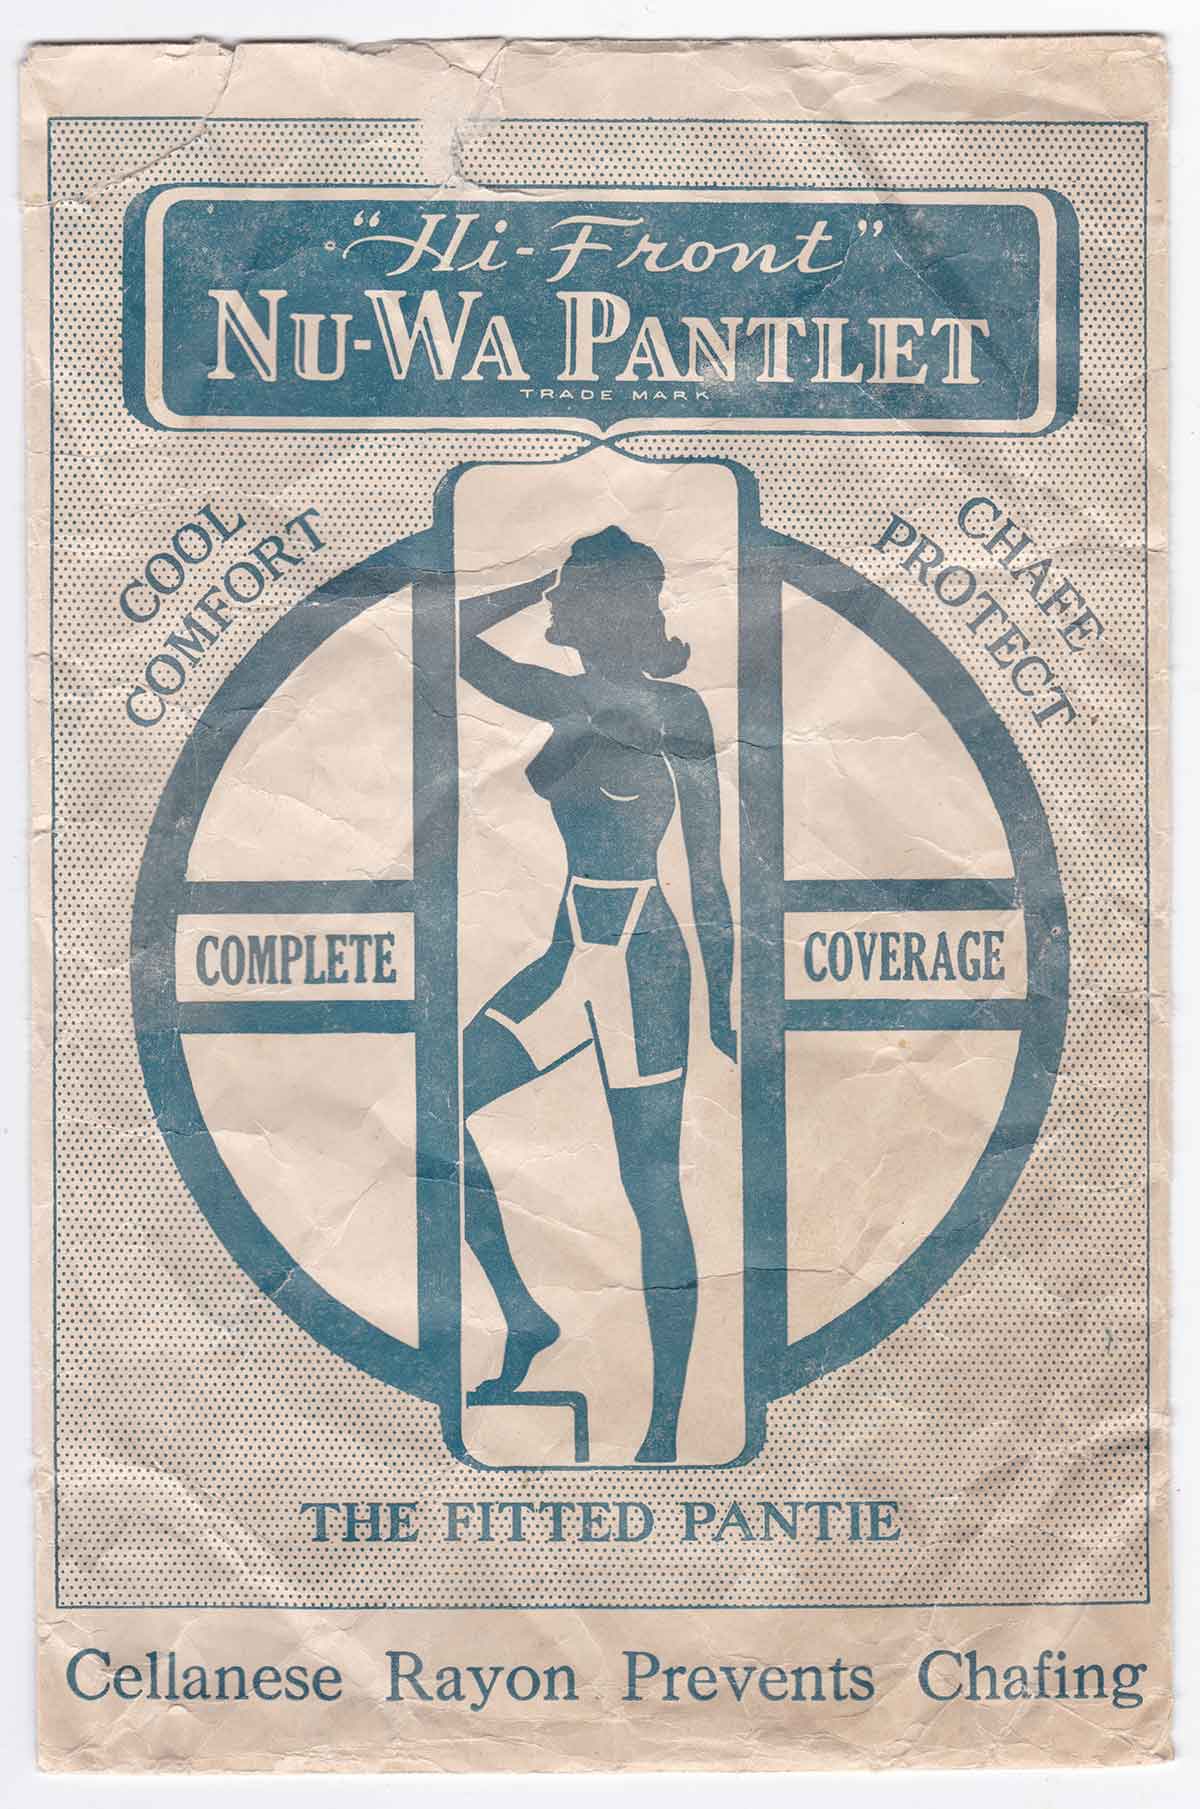 'Hi-Front Nu-Wa Pantlet' - Celanese Rayon Anti-Chafing Knickers, c. 1930s, USA. The Underpinnings Museum. Photography by Tigz Rice